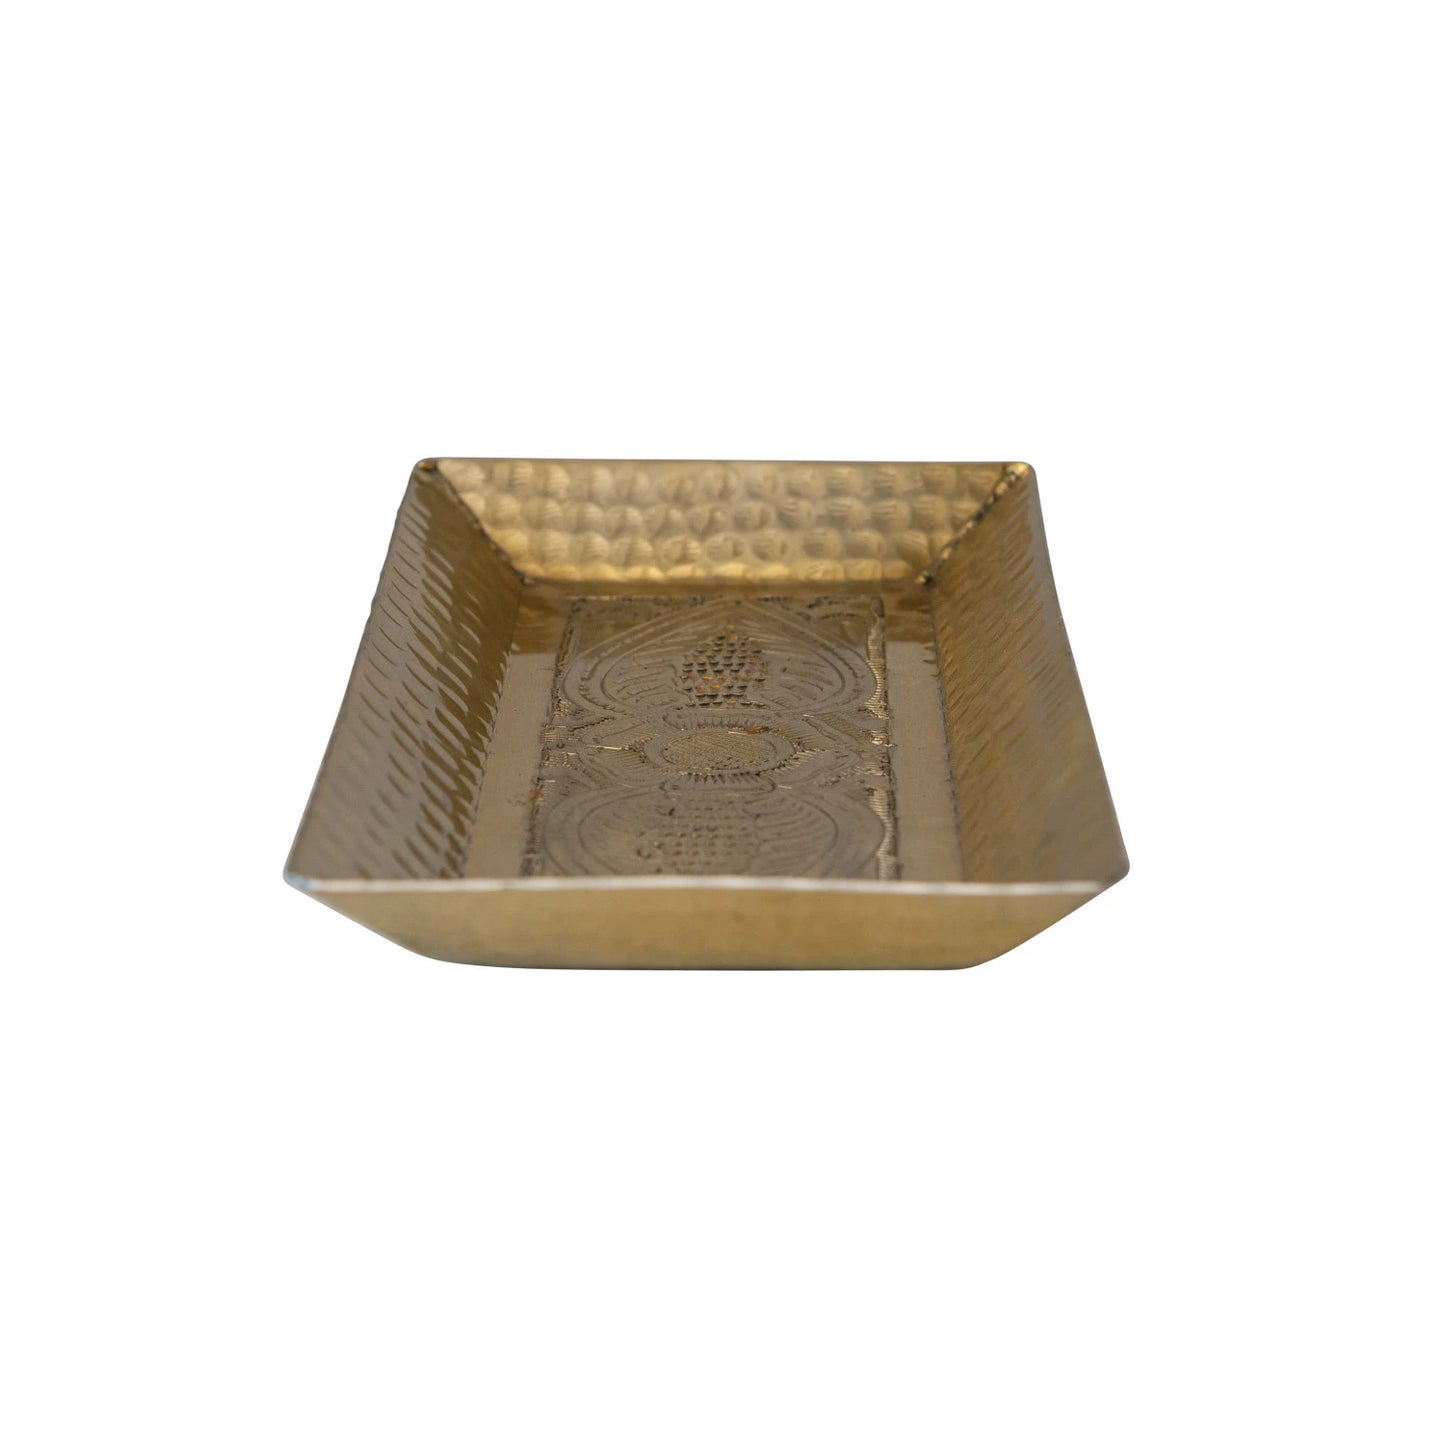 Decorative Hammered Aluminum Tray w/ Stamped Design, Gold Finish